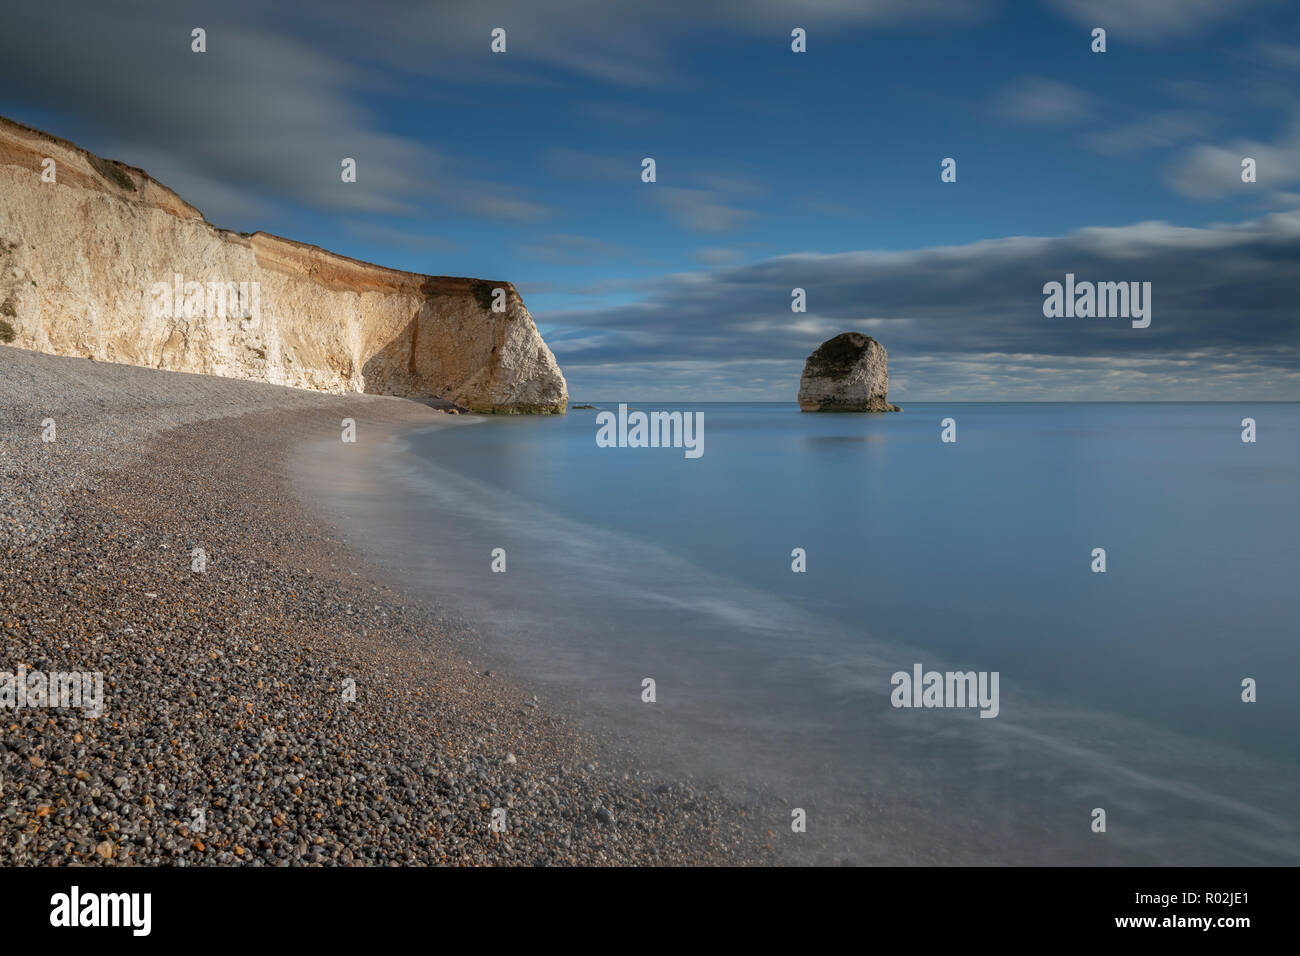 View of the pebbly beach at Freshwater Bay, Isle of Wight Stock Photo